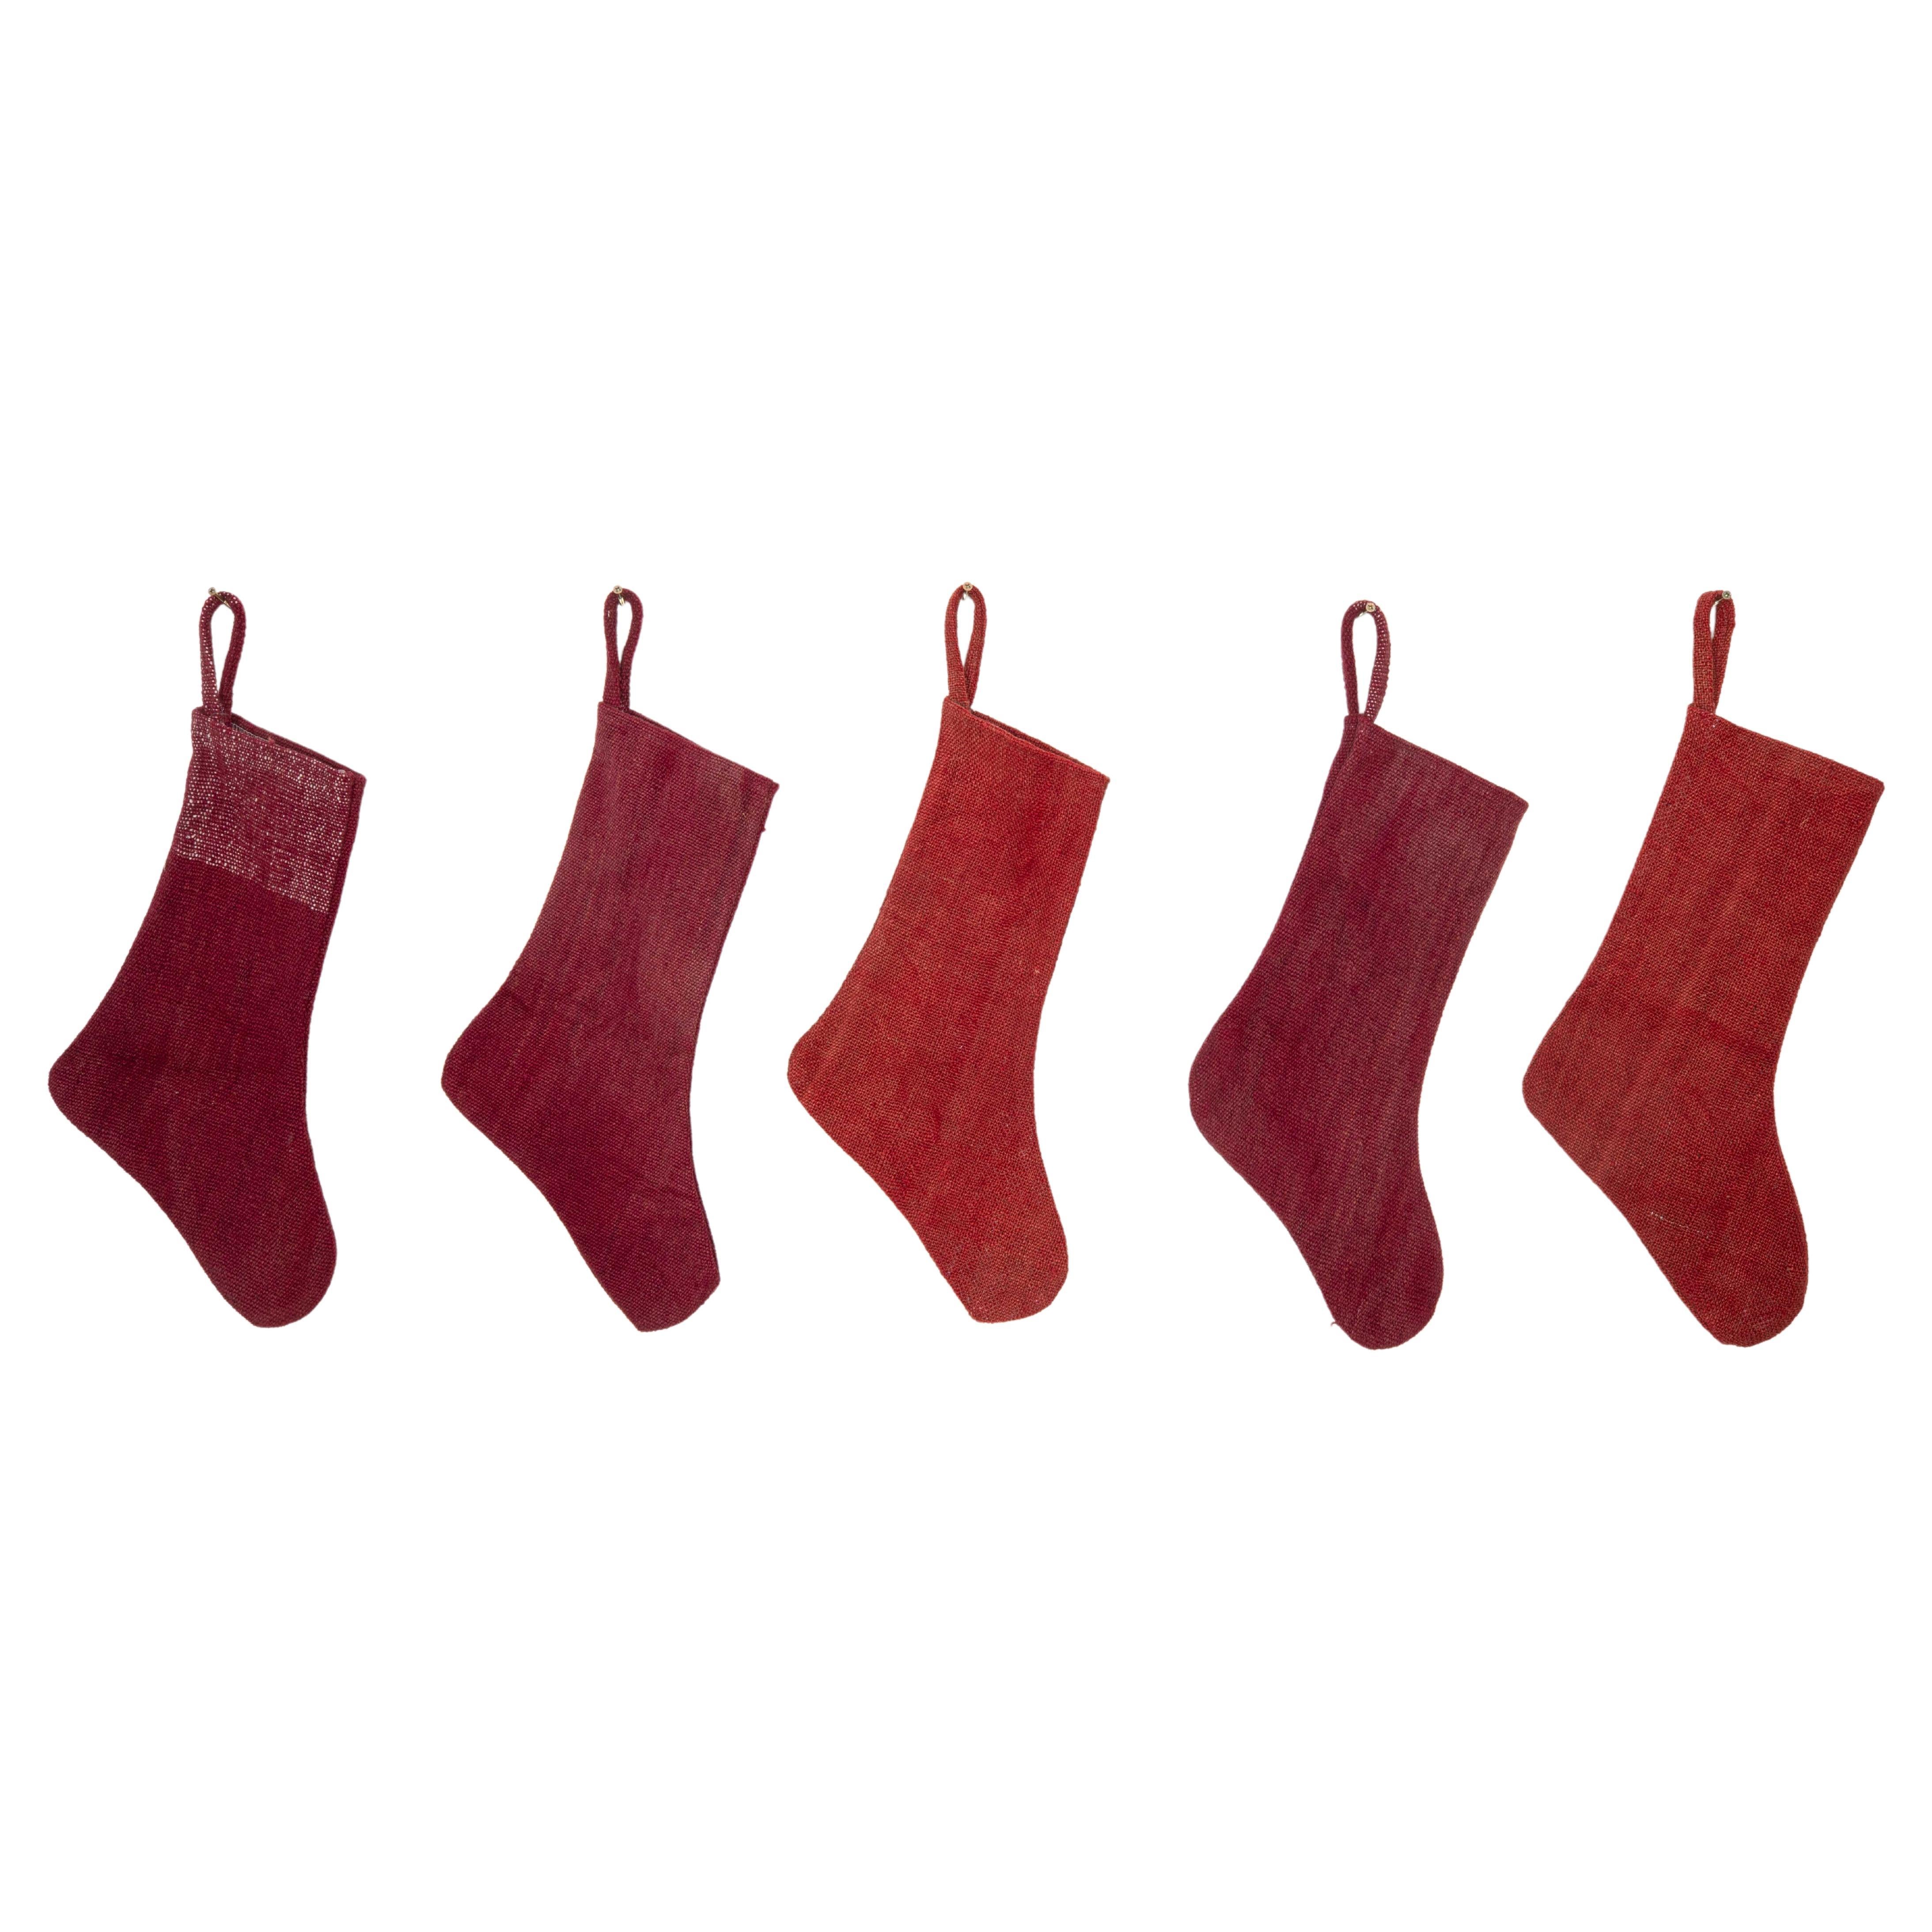 A set of 5 (five) Christmas Stocking Made from Anatolıan Perde Rug Fragments For Sale